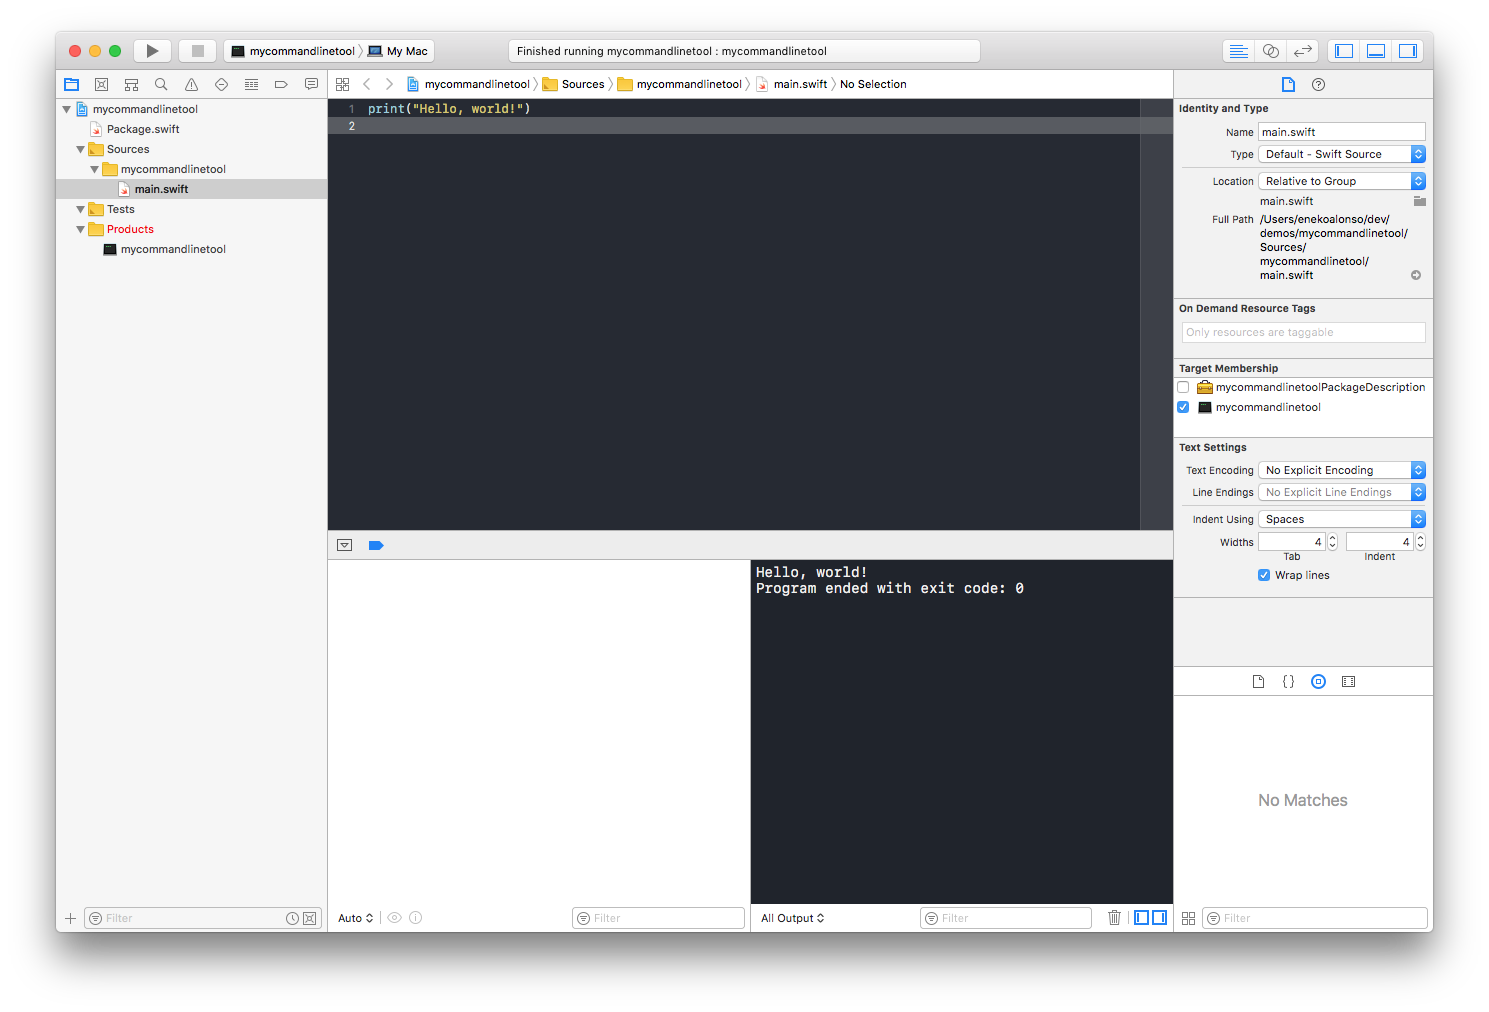 Running the project on Xcode